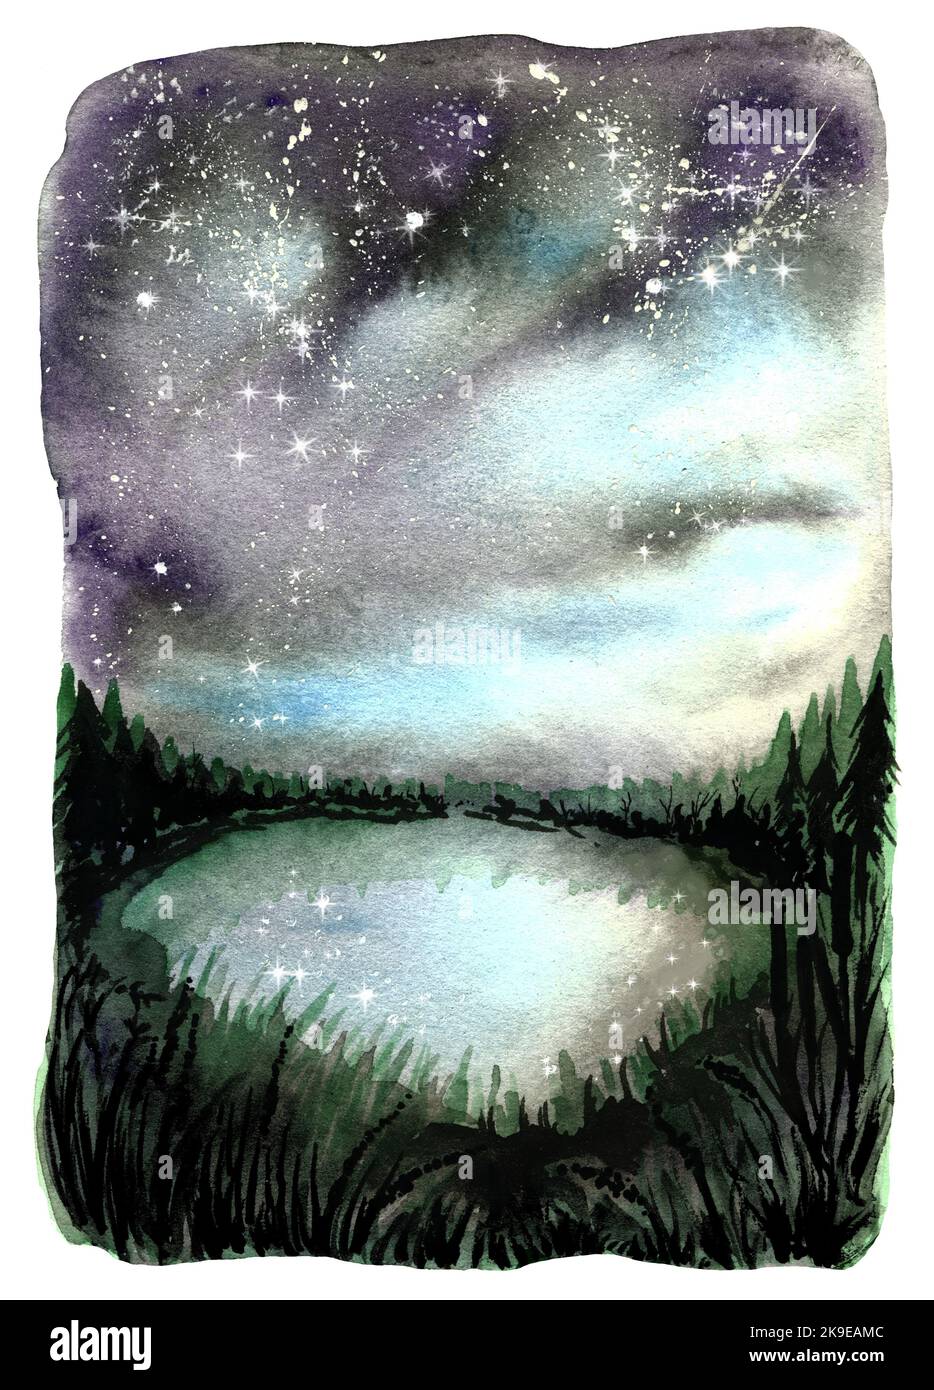 Night lake with stars reflection, watercolor illustration.  Stock Photo